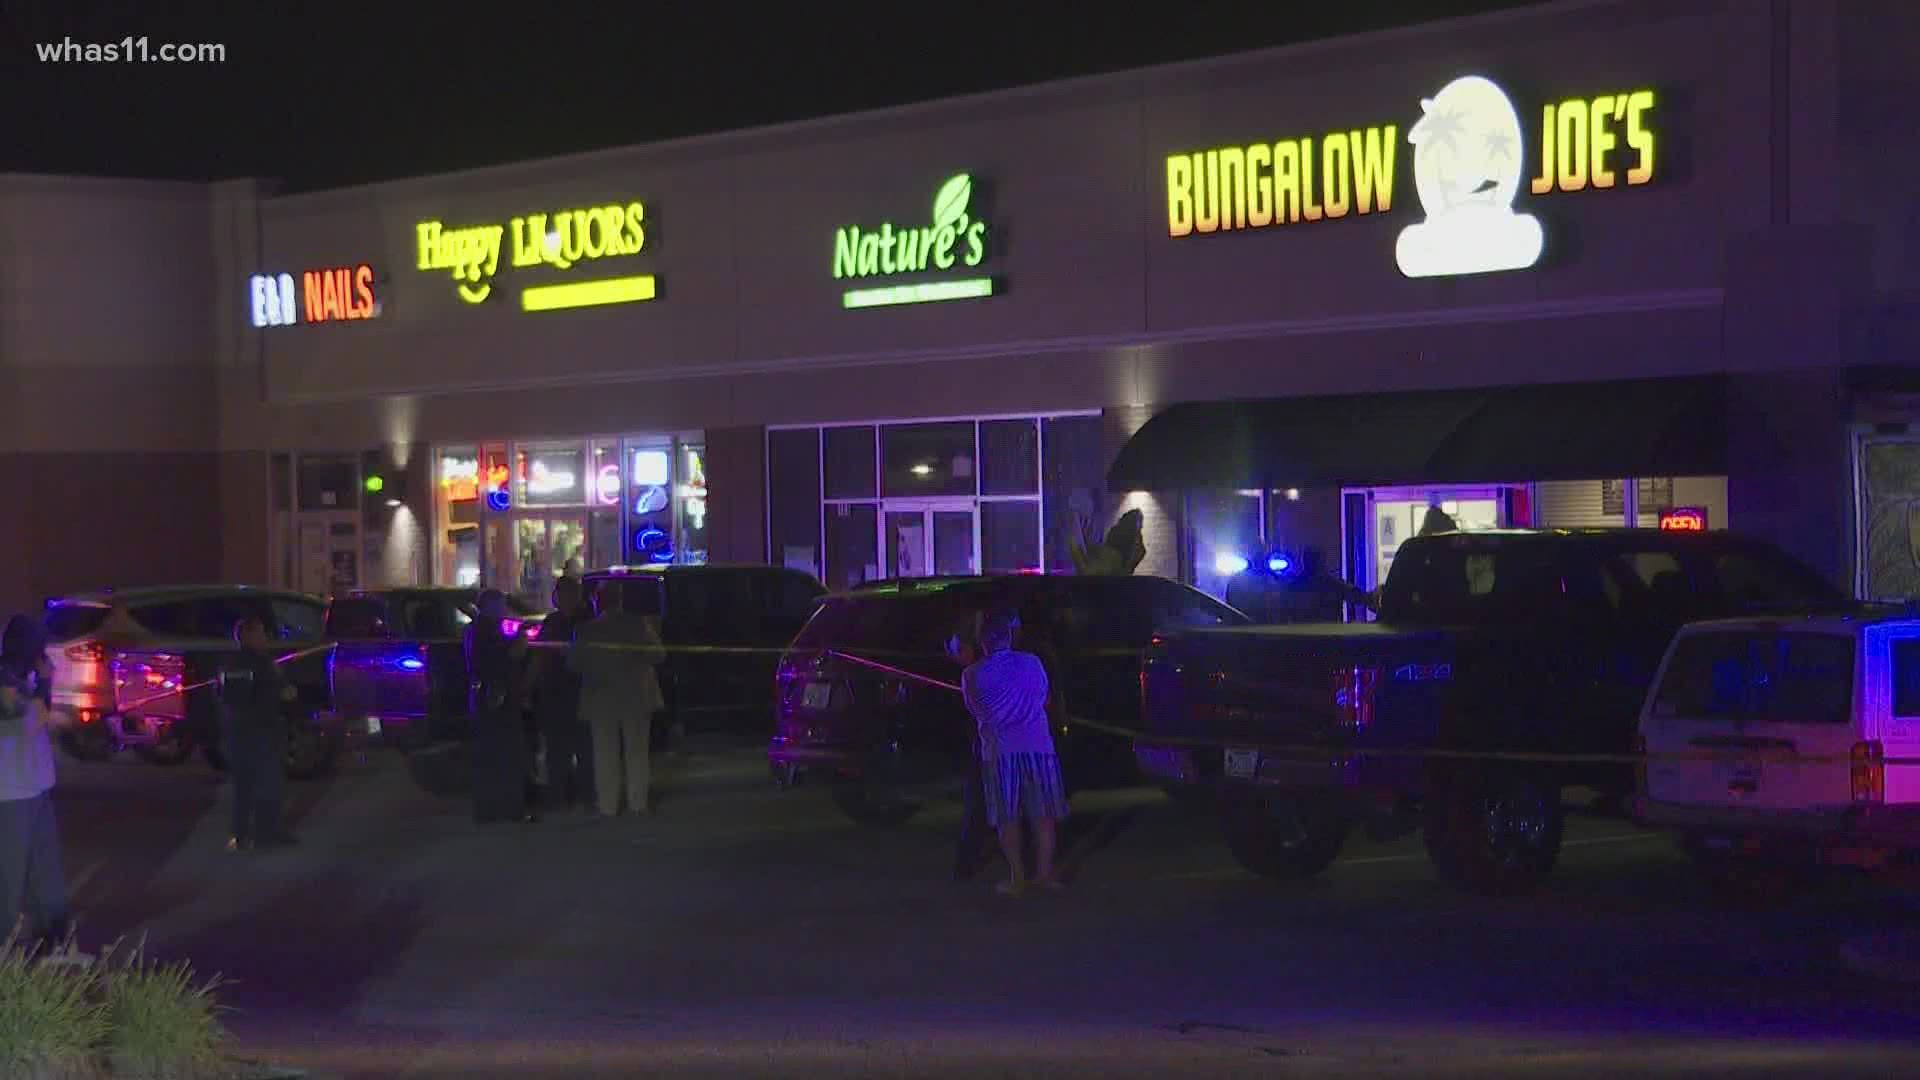 The shooting reportedly happened at a Bungalow Joe's restaurant, according to MetroSafe.